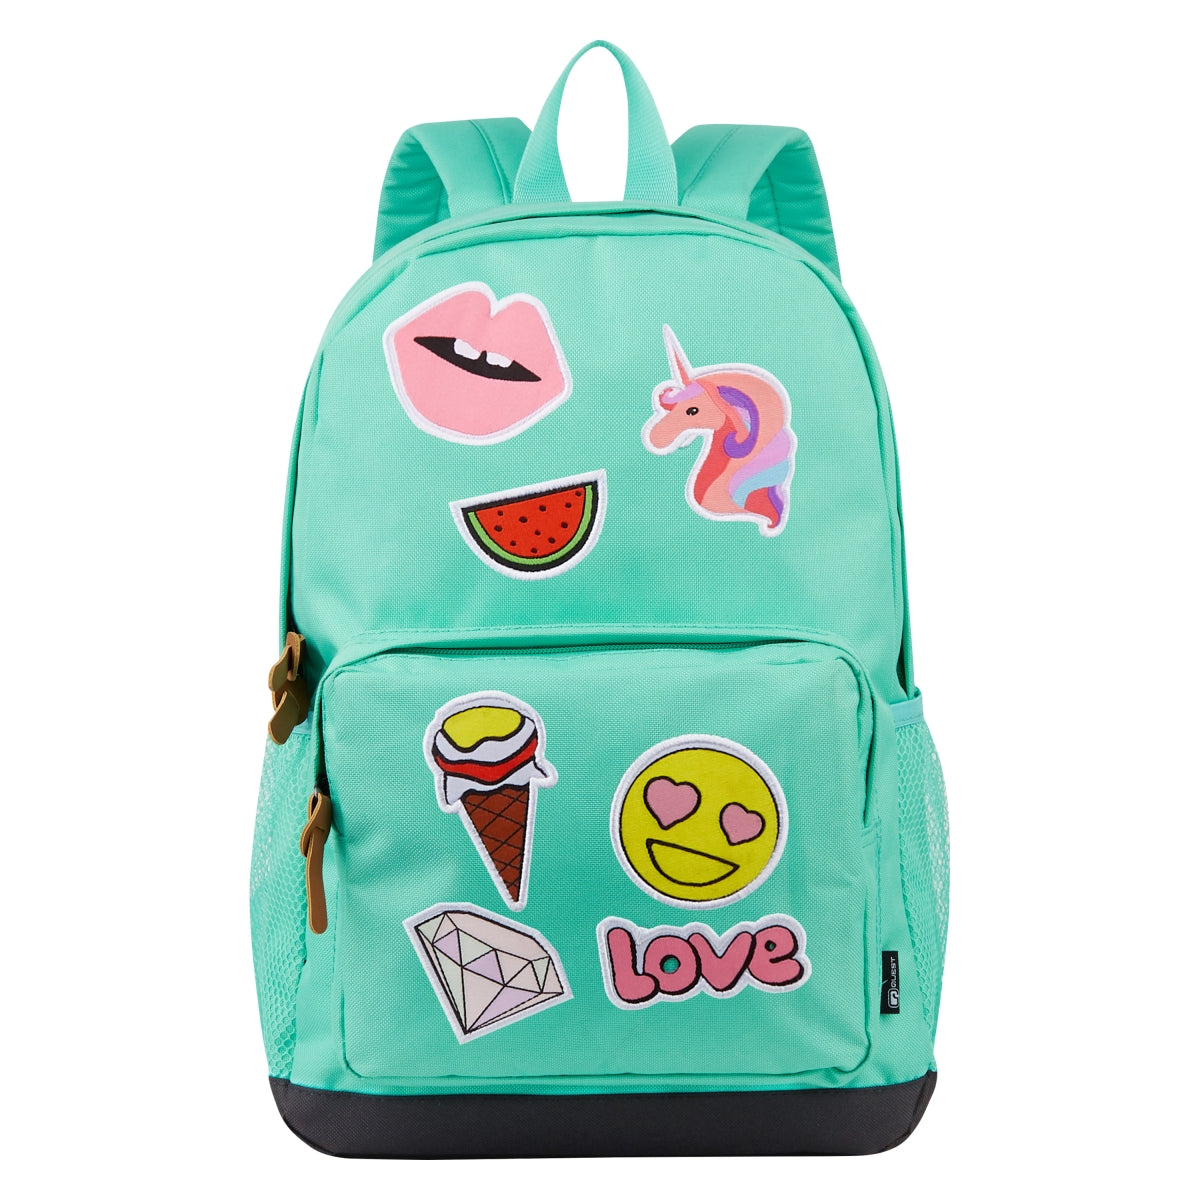 Quest Icon Backpack - Mint